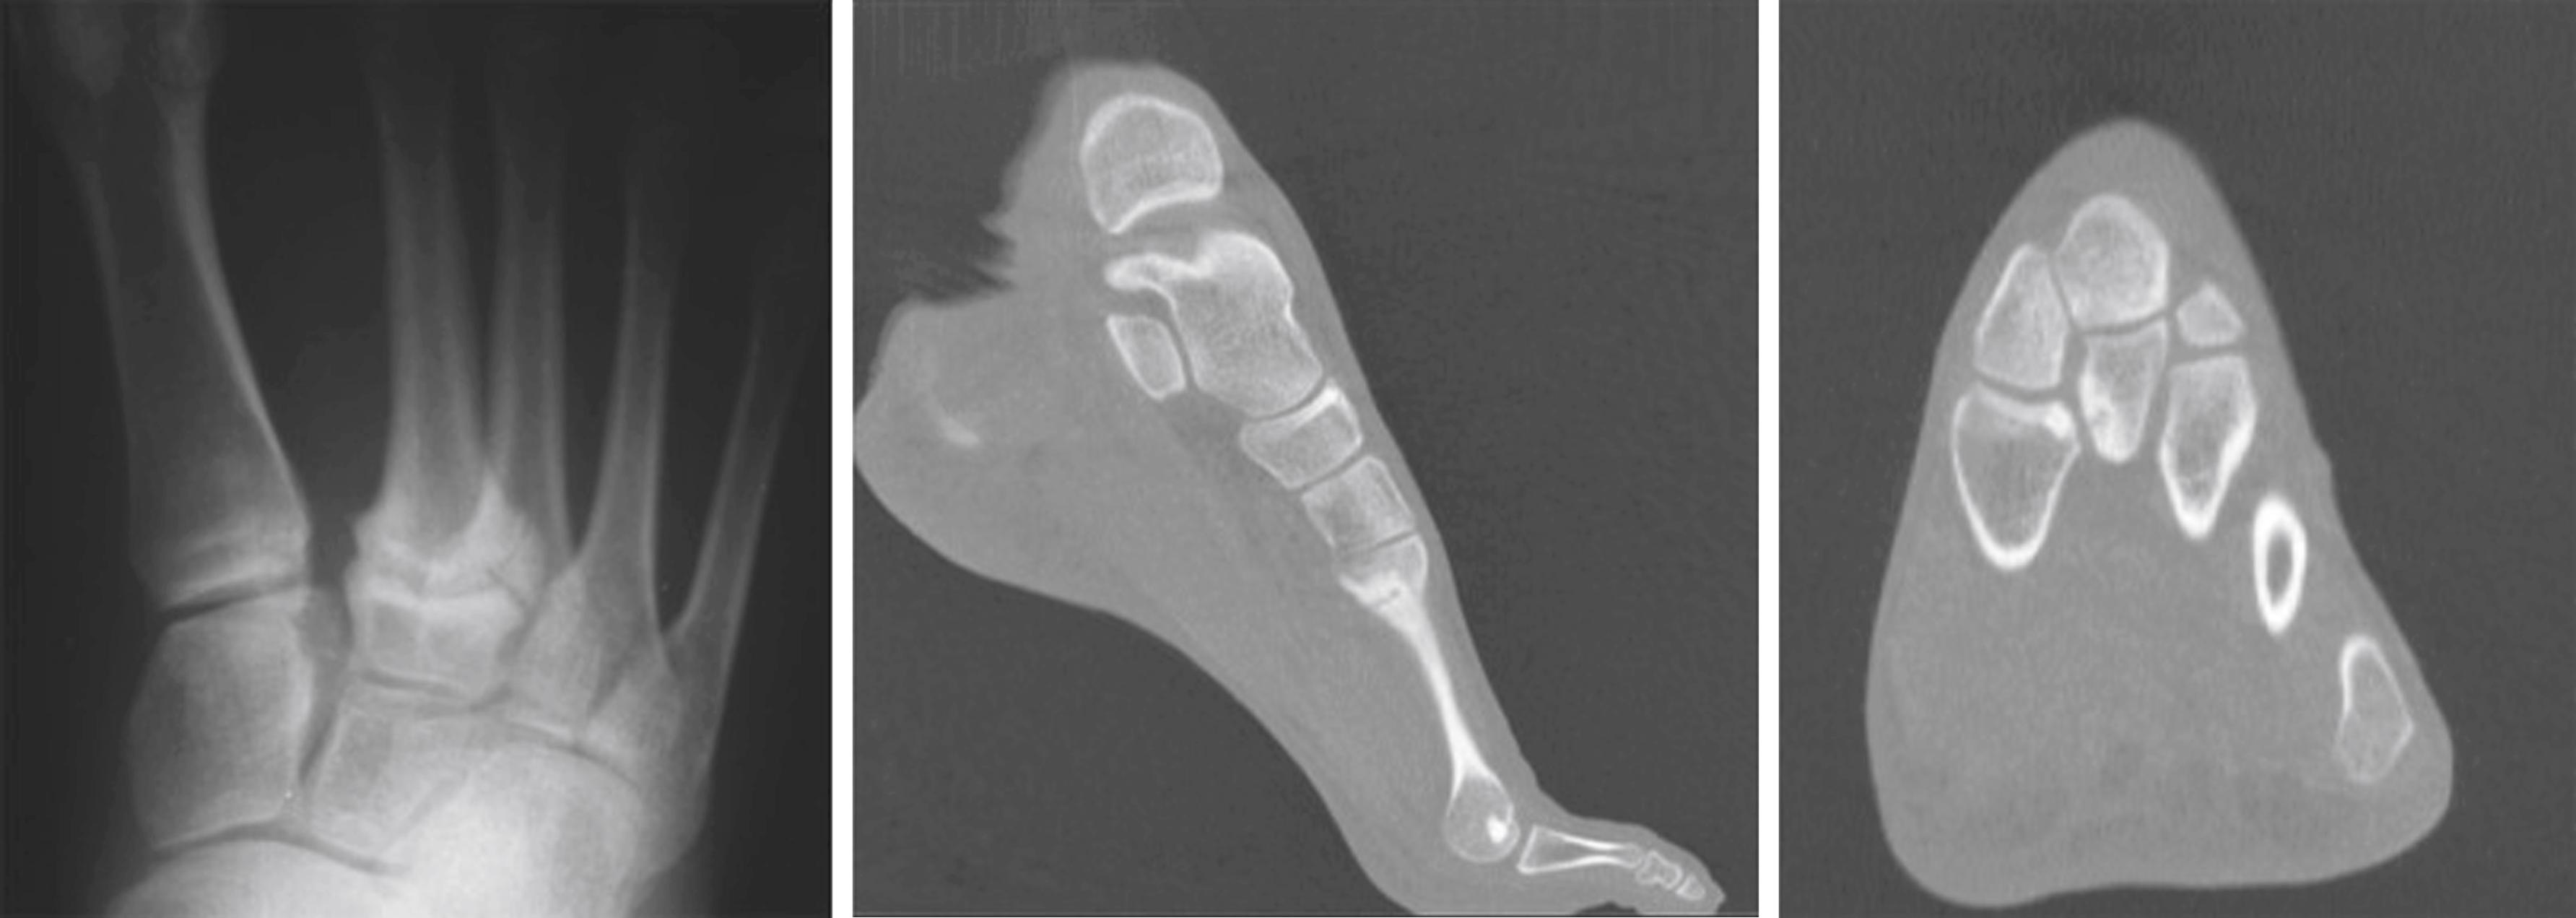 FIG. 200.3, Stress fracture of the base of the second metatarsal in dancers. Radiographic anterior-posterior view and computed tomography scan, sagittal and transverse plane views demonstrating the transverse fracture line.